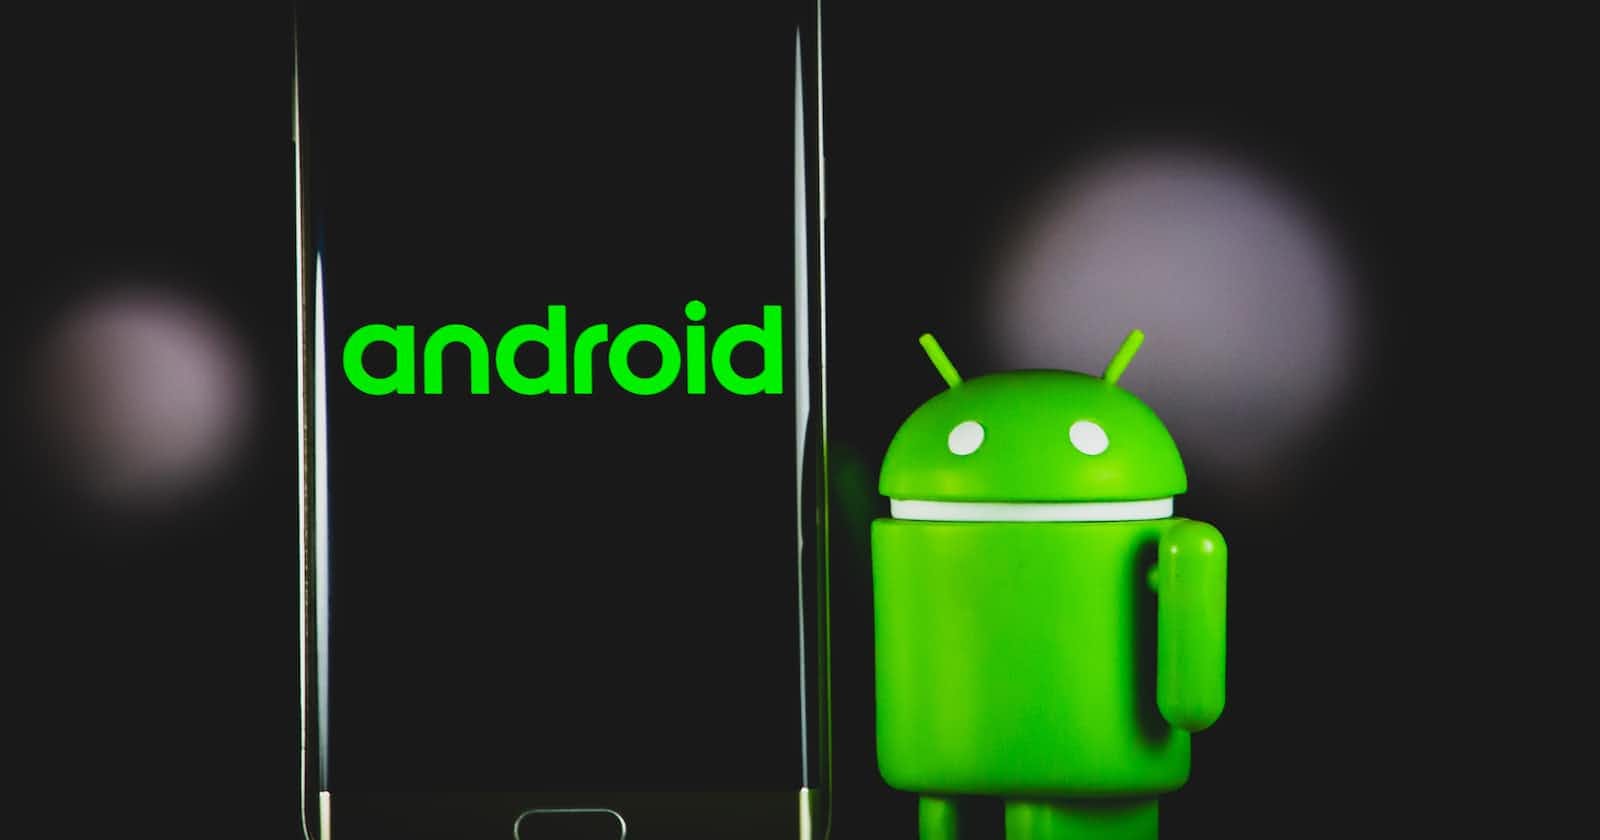 A programmer's guide to Android Development